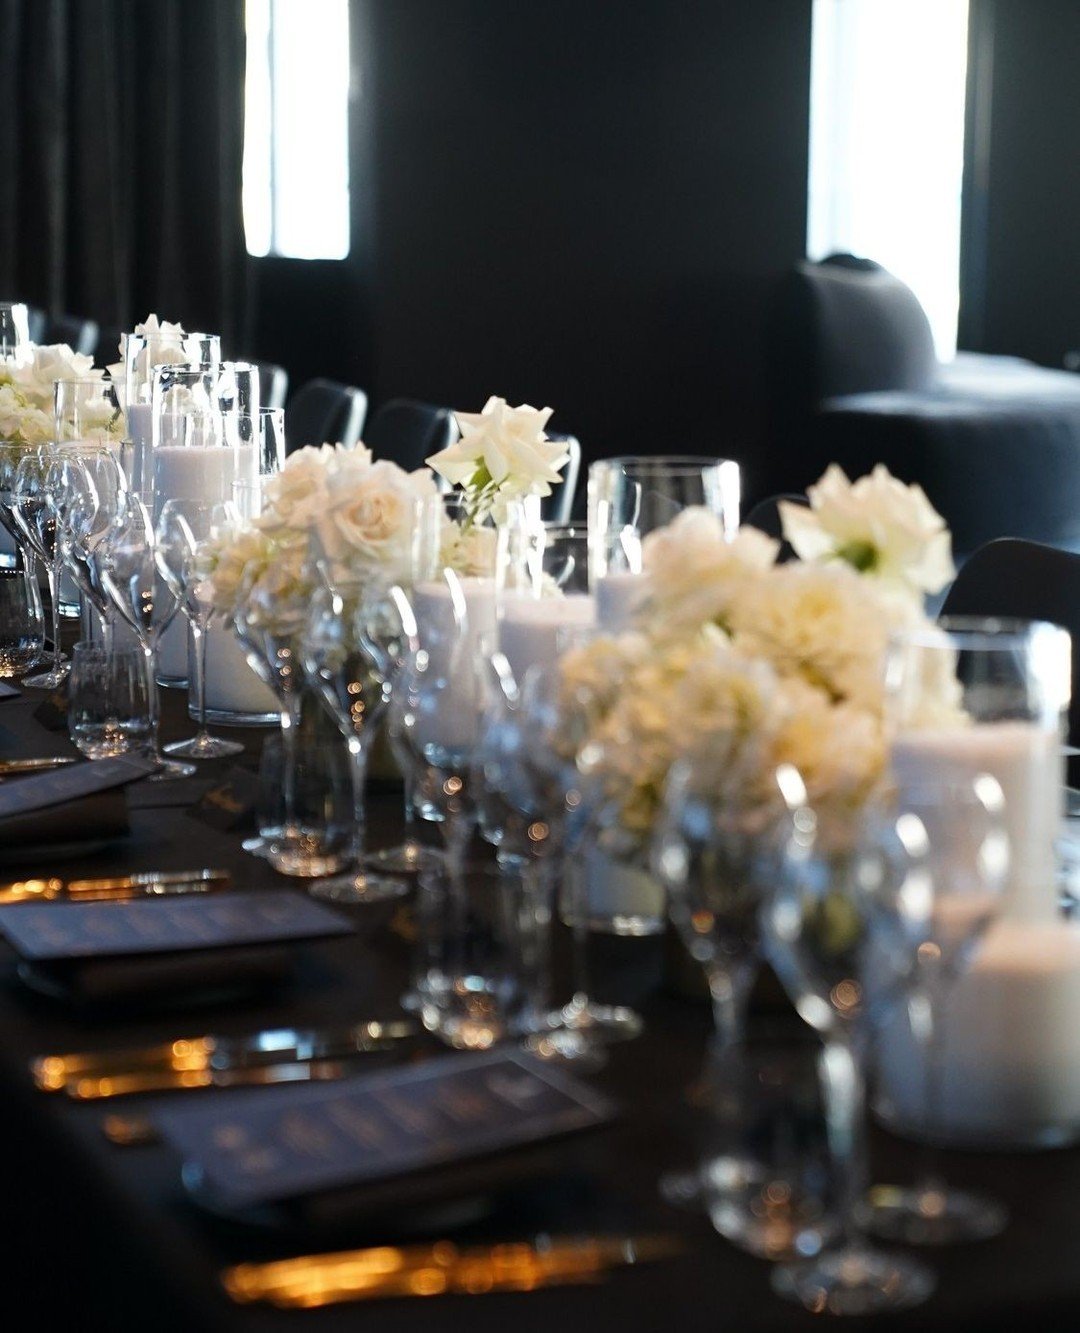 Events are effortless with the LKH Events team. From dedicated planners to a network of trusted suppliers, leave the details to us and watch your vision come to life.